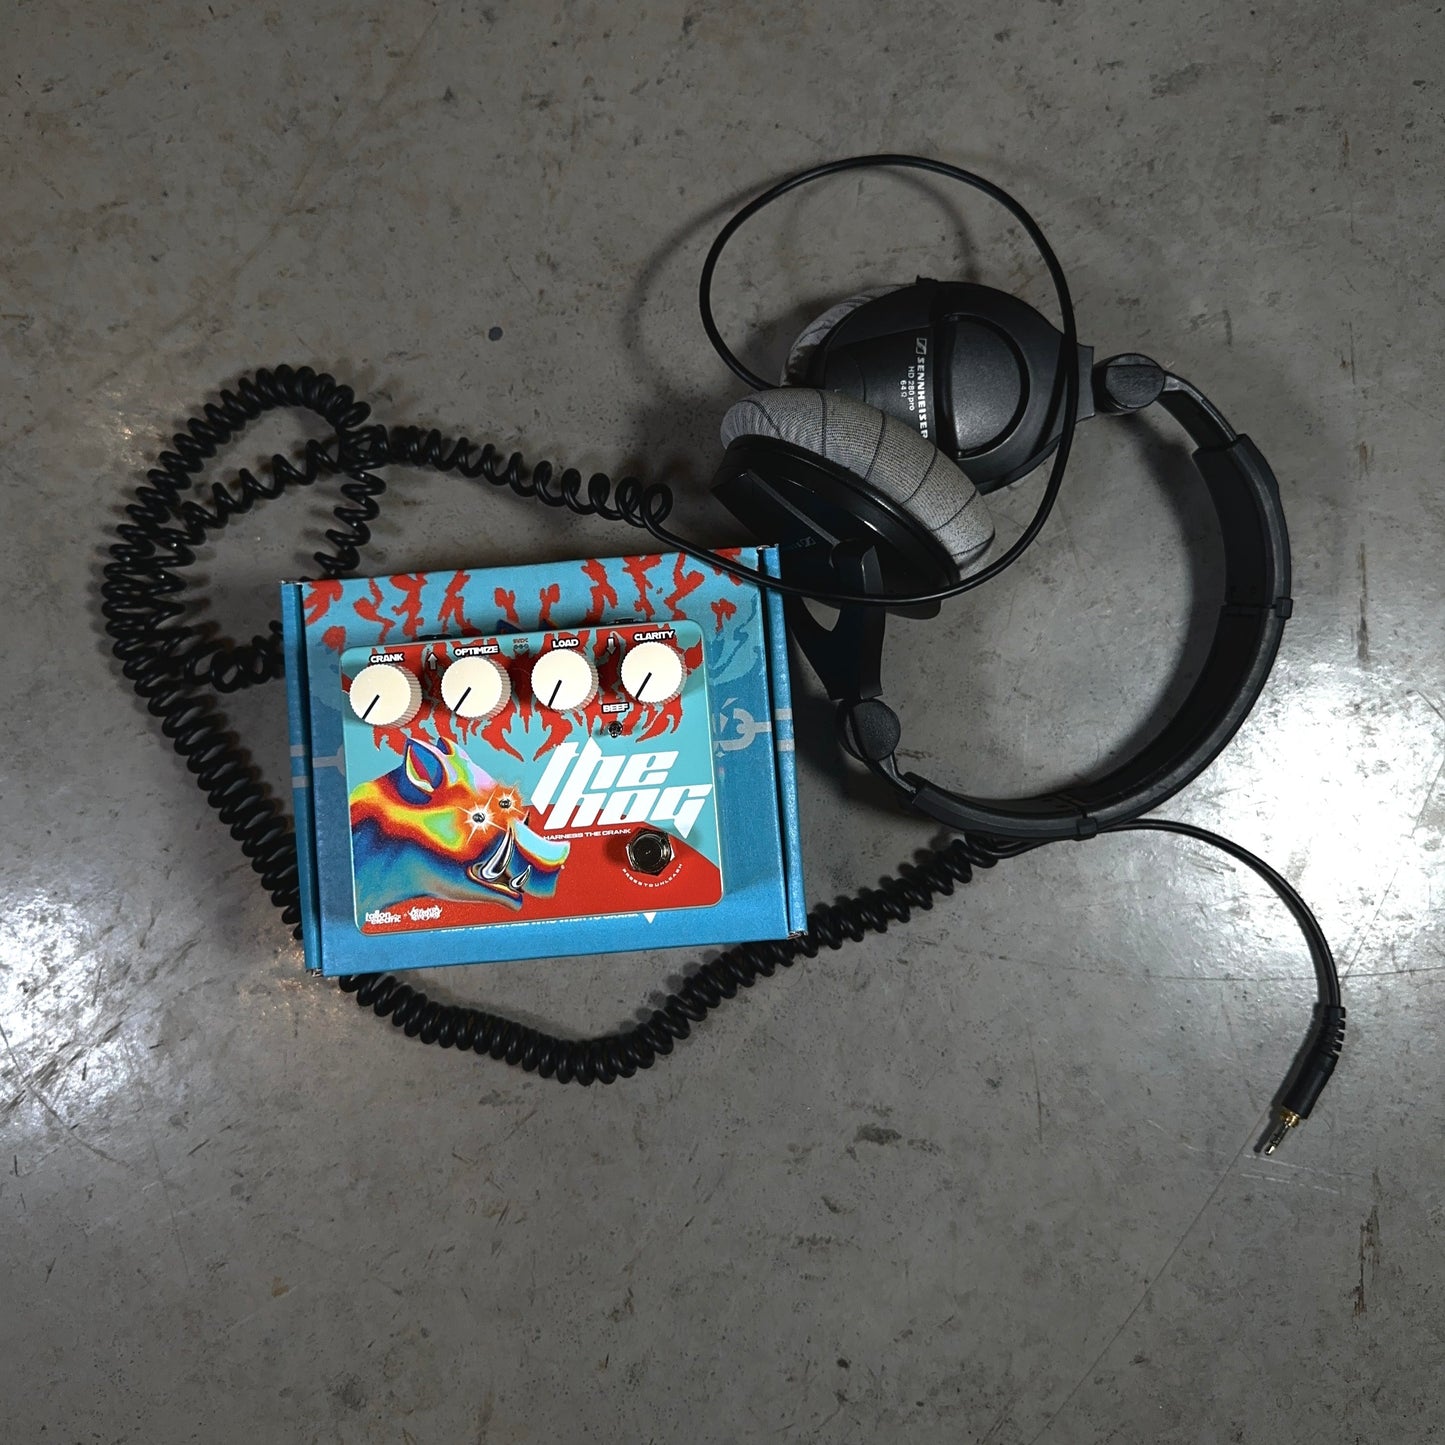 A pair of studio headphones and their cord tangle around The Hog guitar pedal by Tallon Electric and Bilmuri.